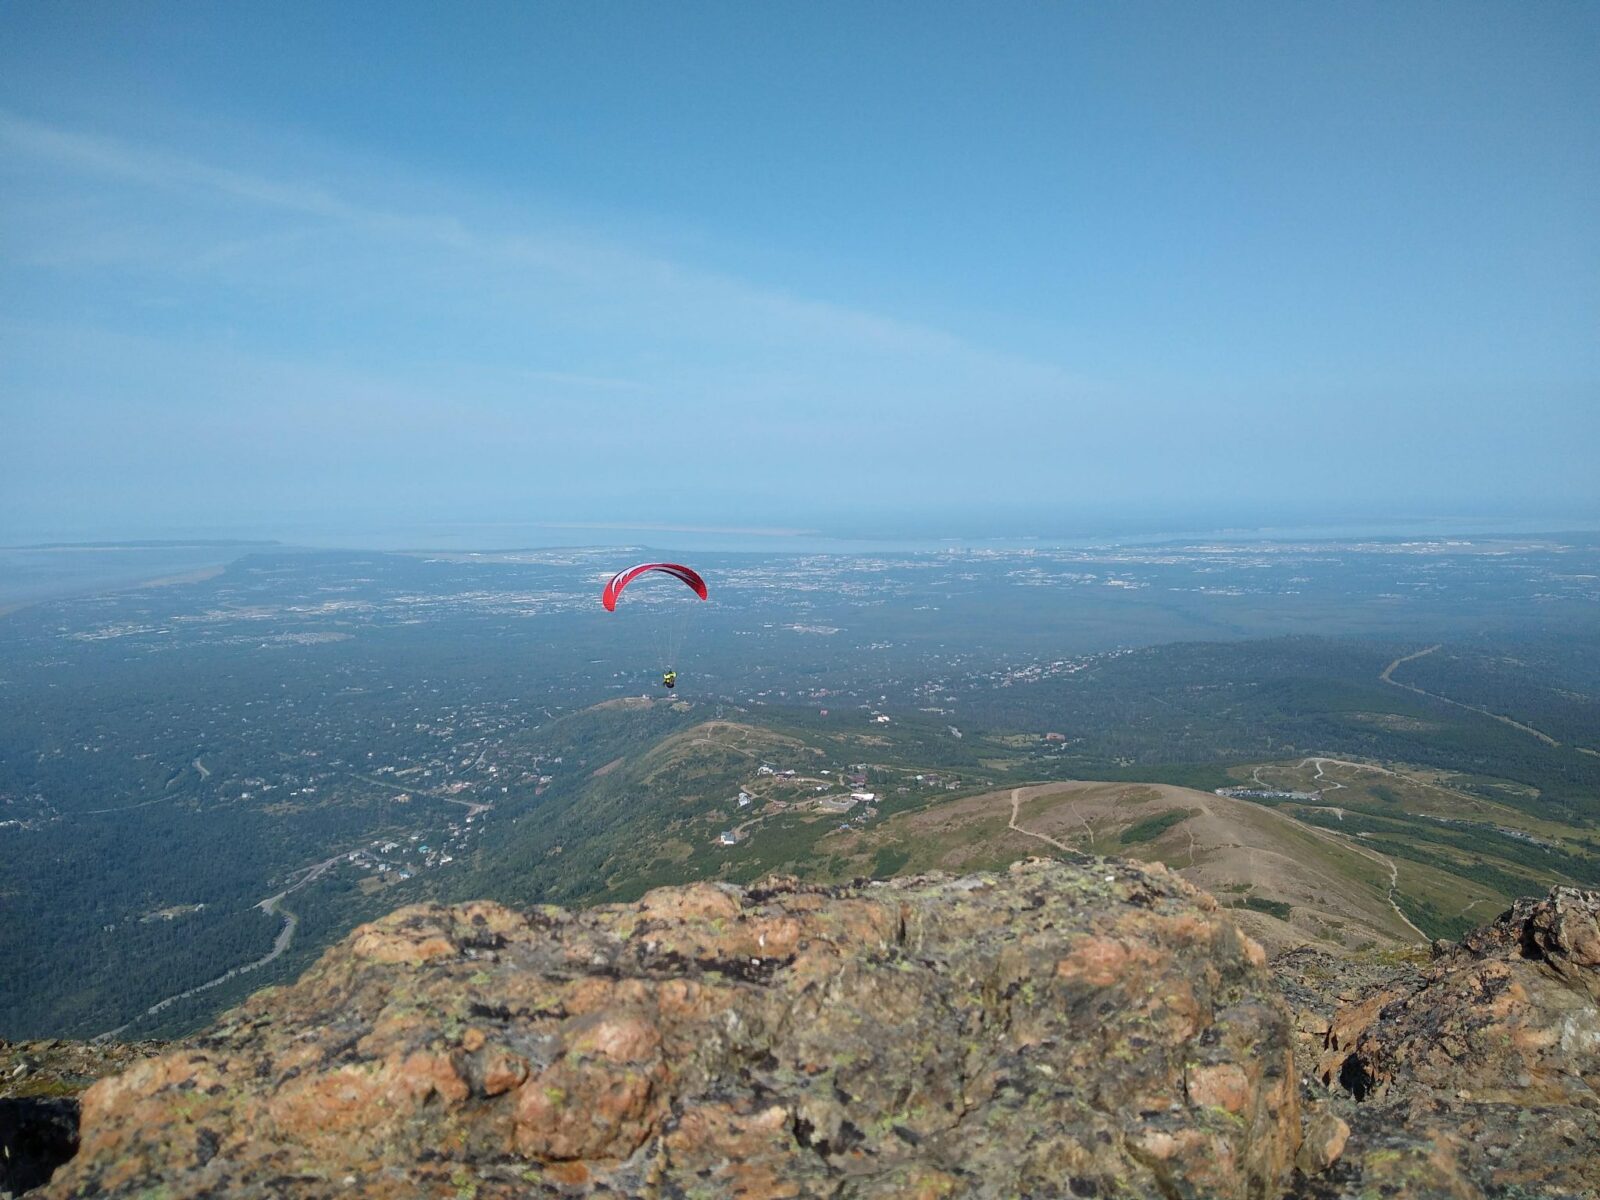 the rocky summit of flattop mountain with a trail below and houses and trees and roads far below. In the foreground is a paraglider with a red parachute